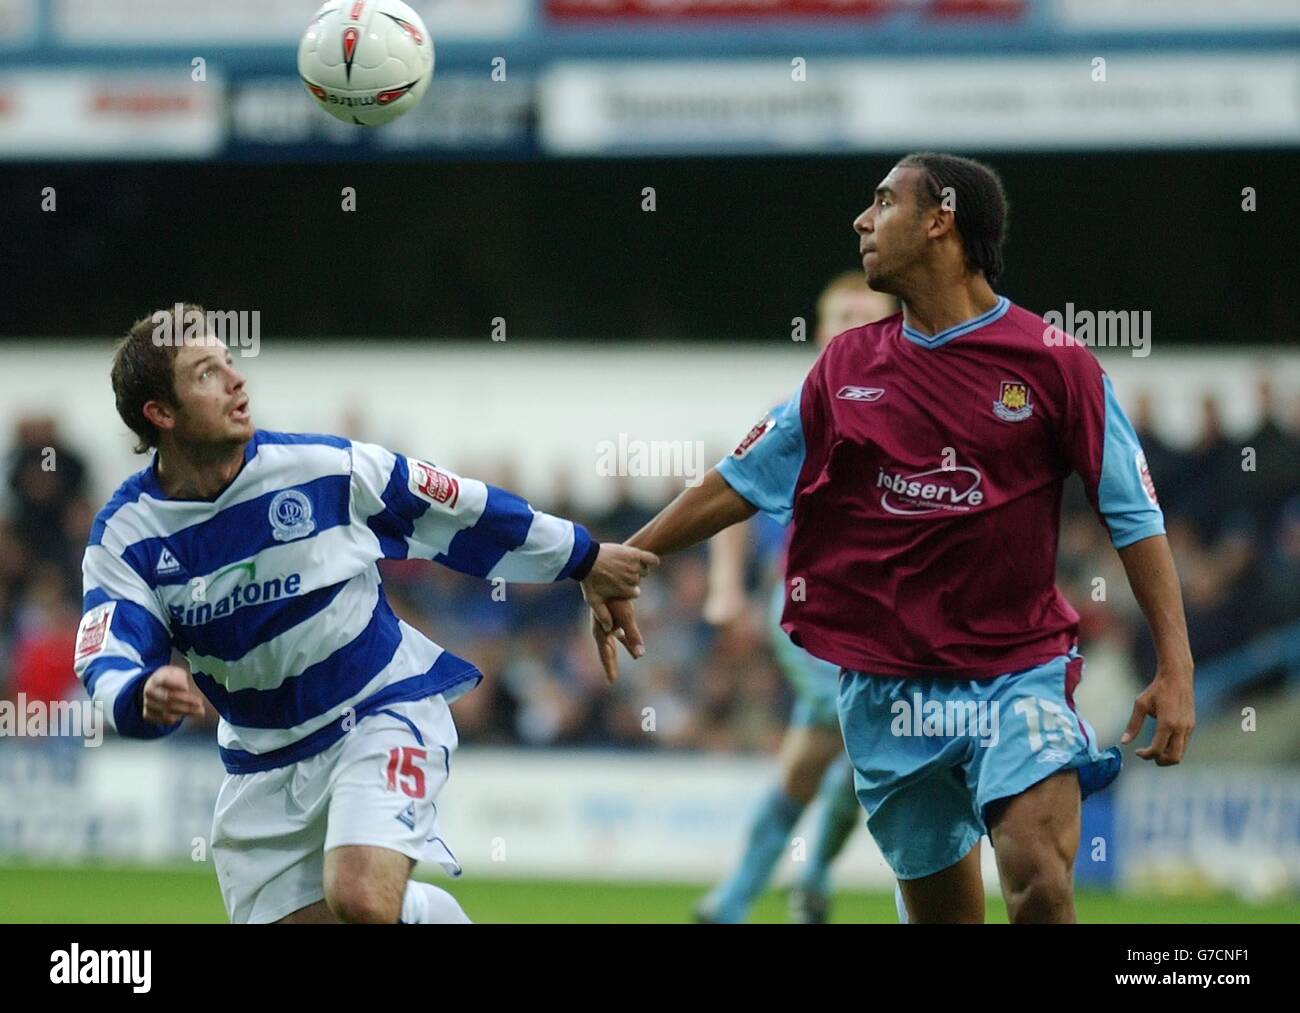 Queen's Park Rangers Jamie Cureton, left, holds off West Ham's Anton Ferdinand as they battle for the ball during their Coca-Cola Championship match at Loftus Road, west London, Saturday October 16, 2004. NO UNOFFICIAL CLUB WEBSITE USE. Stock Photo